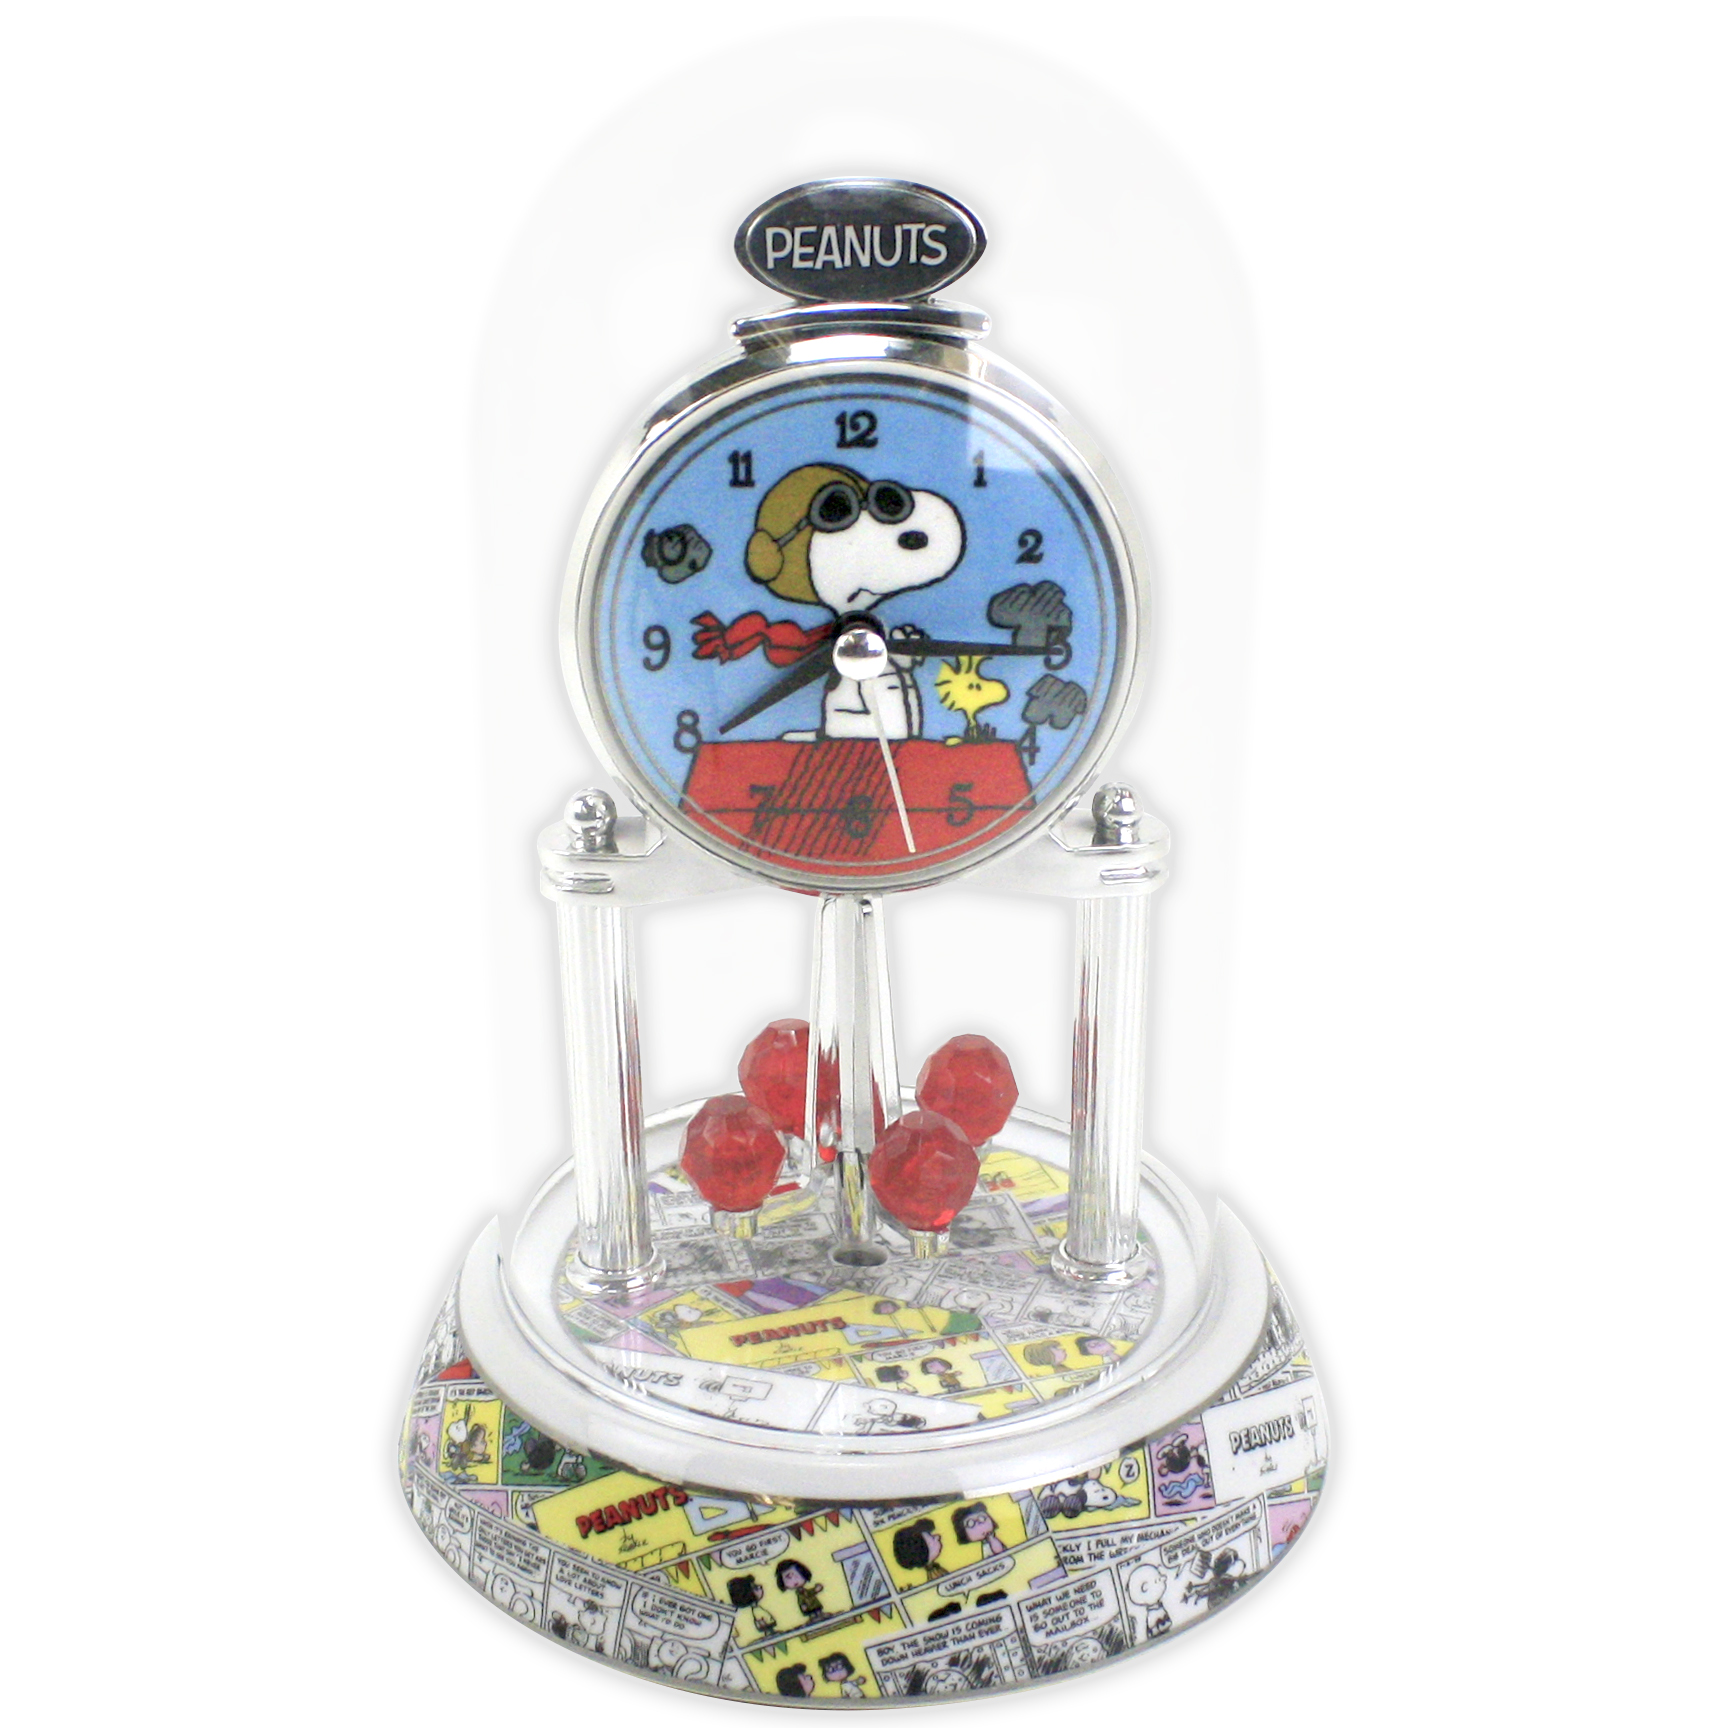 Peanuts By Schulz Snoopy Anniversary Clock